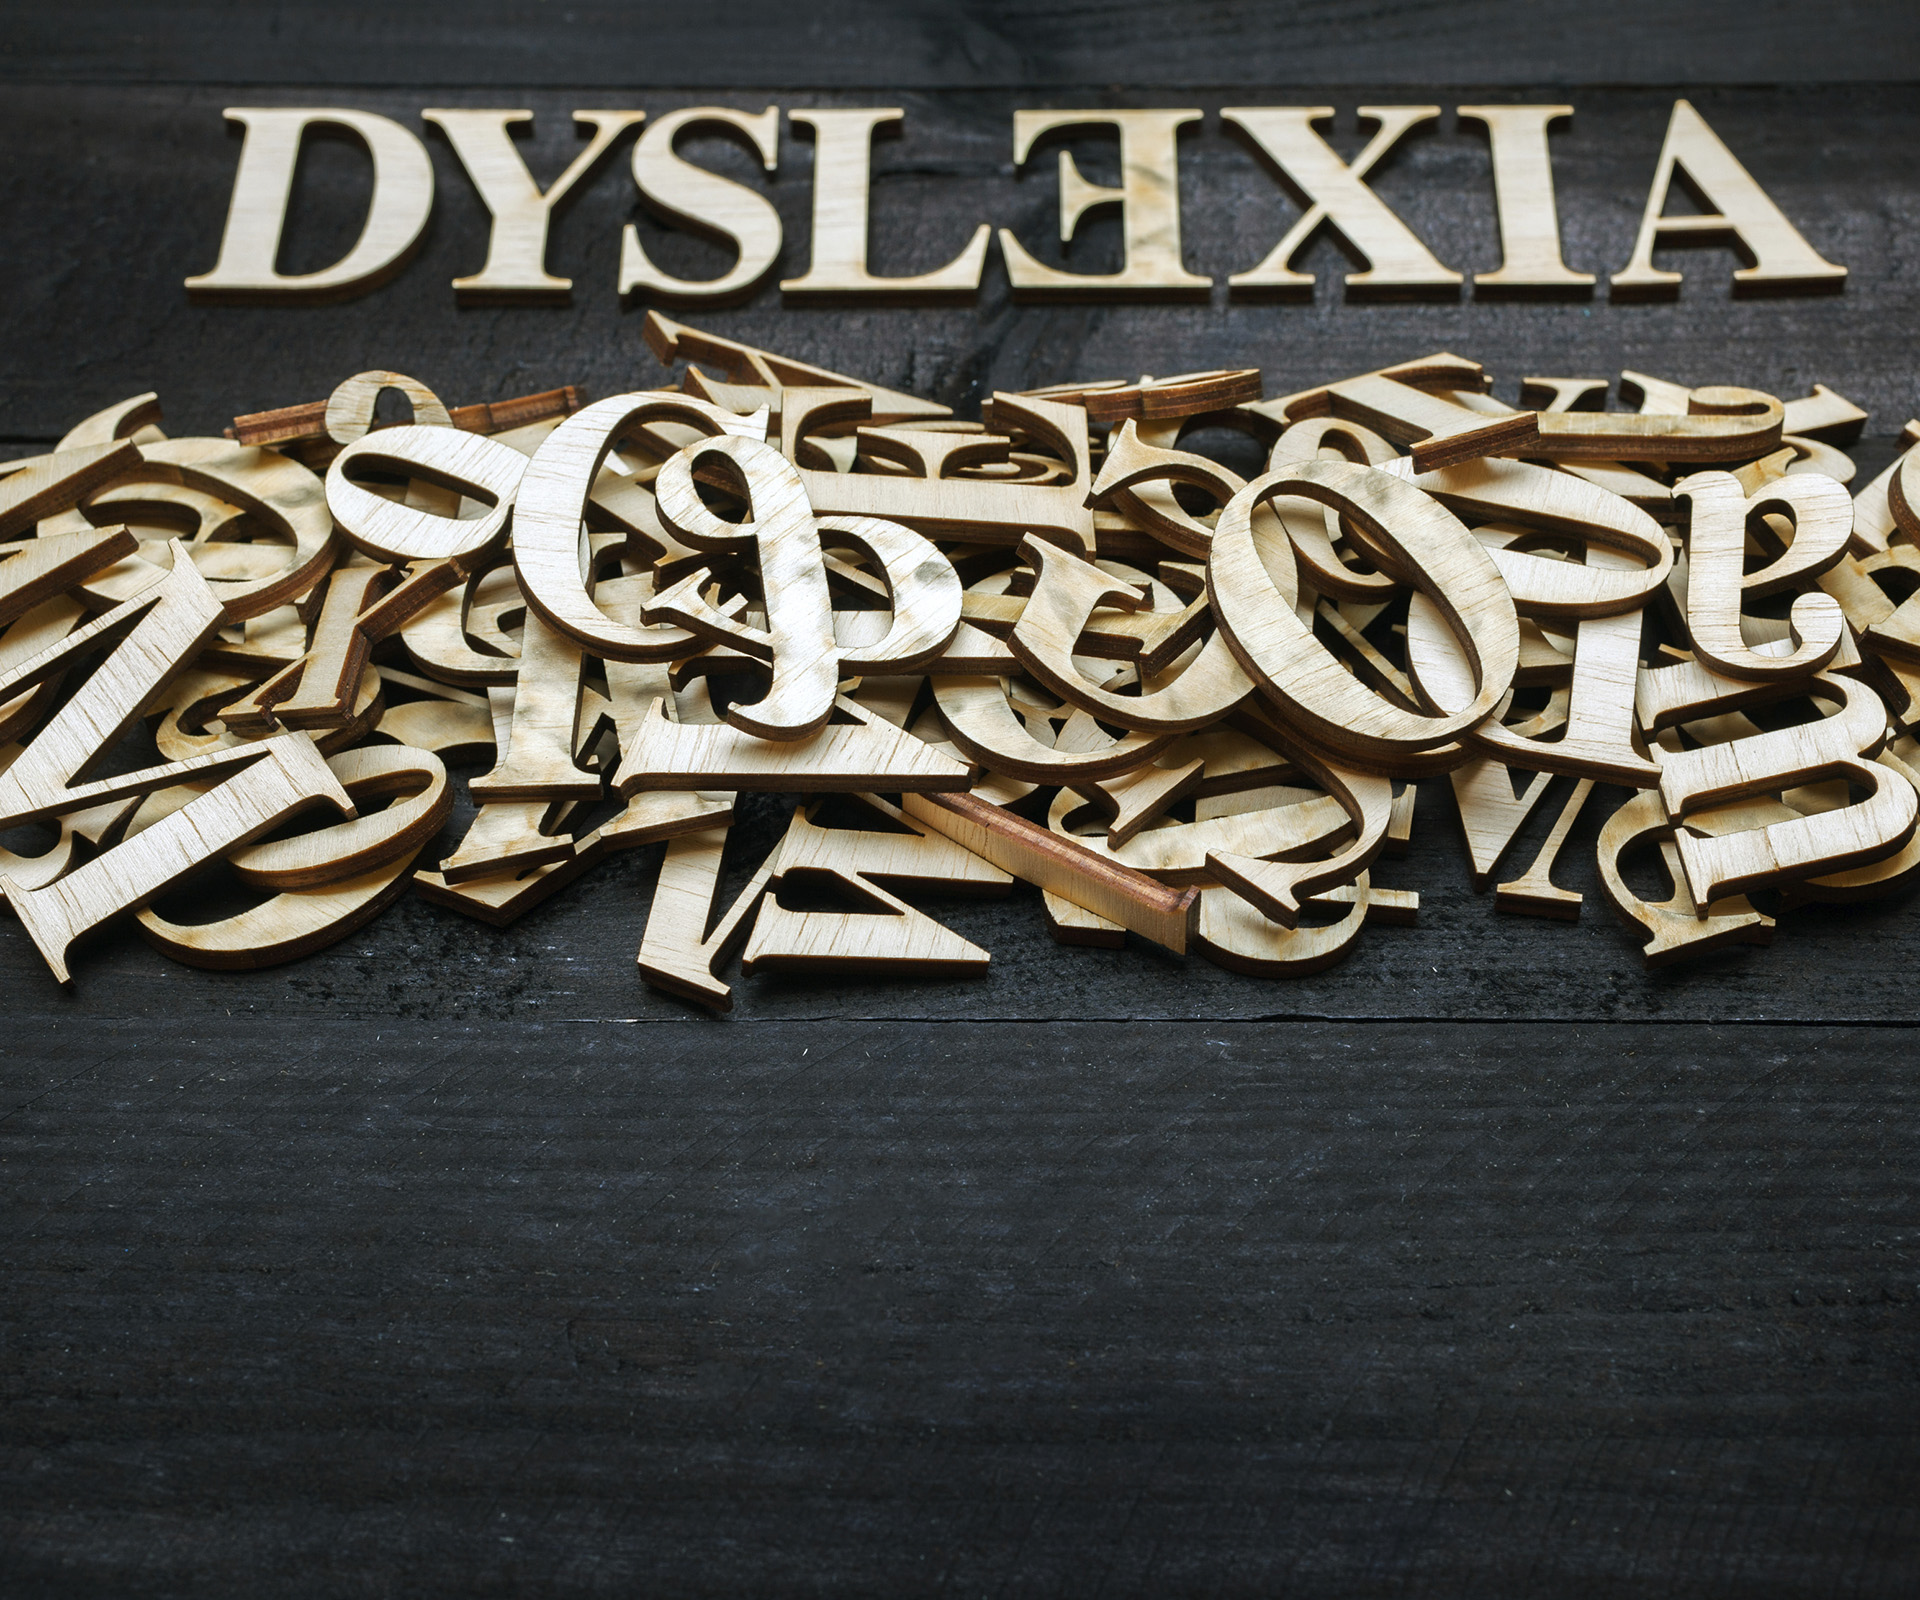 Website shows what it’s like to be dyslexic